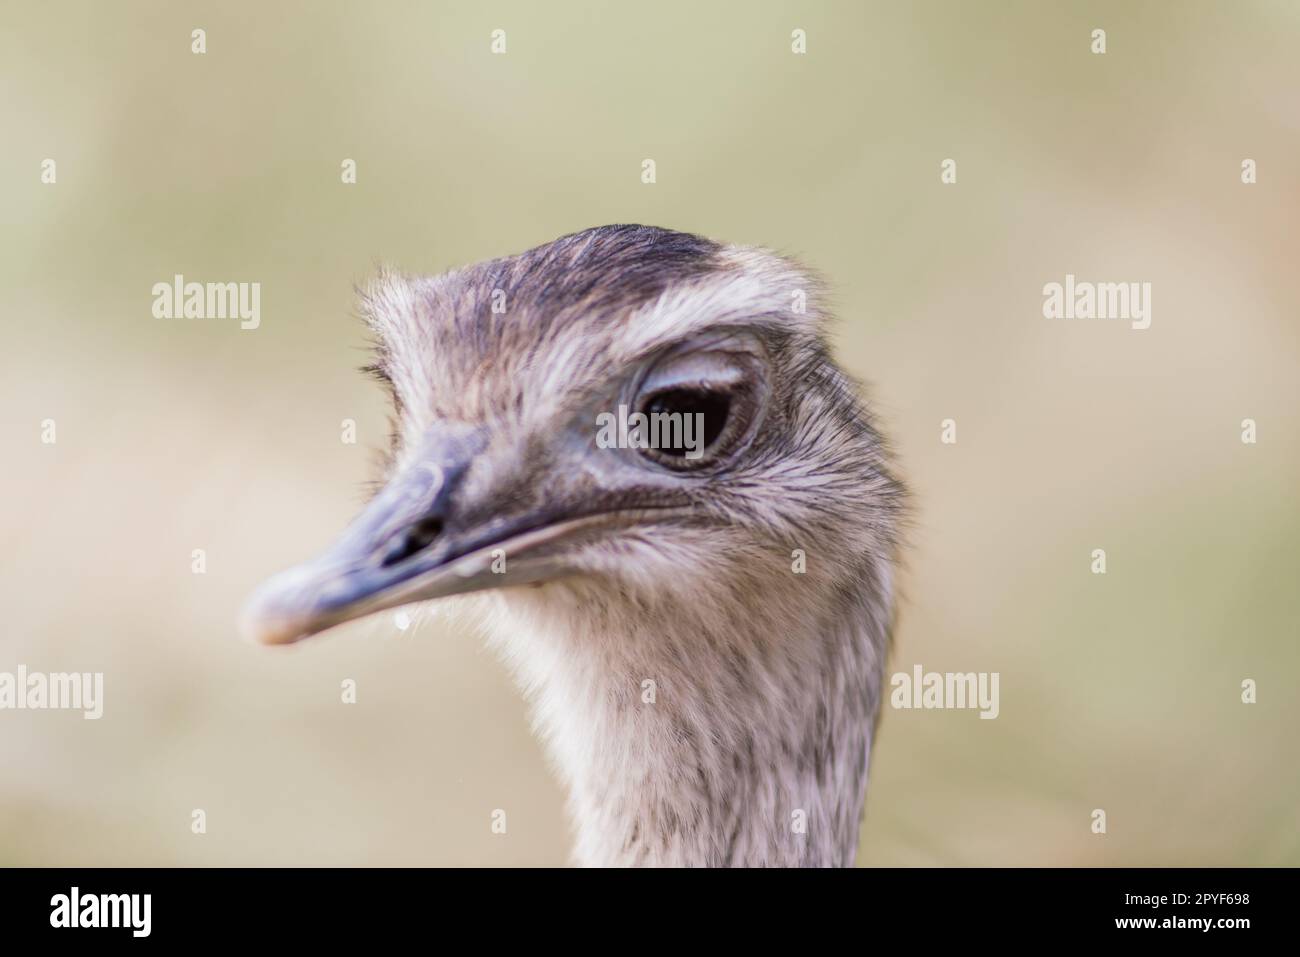 Ostrich head close up, autumn weather park outdoors Stock Photo